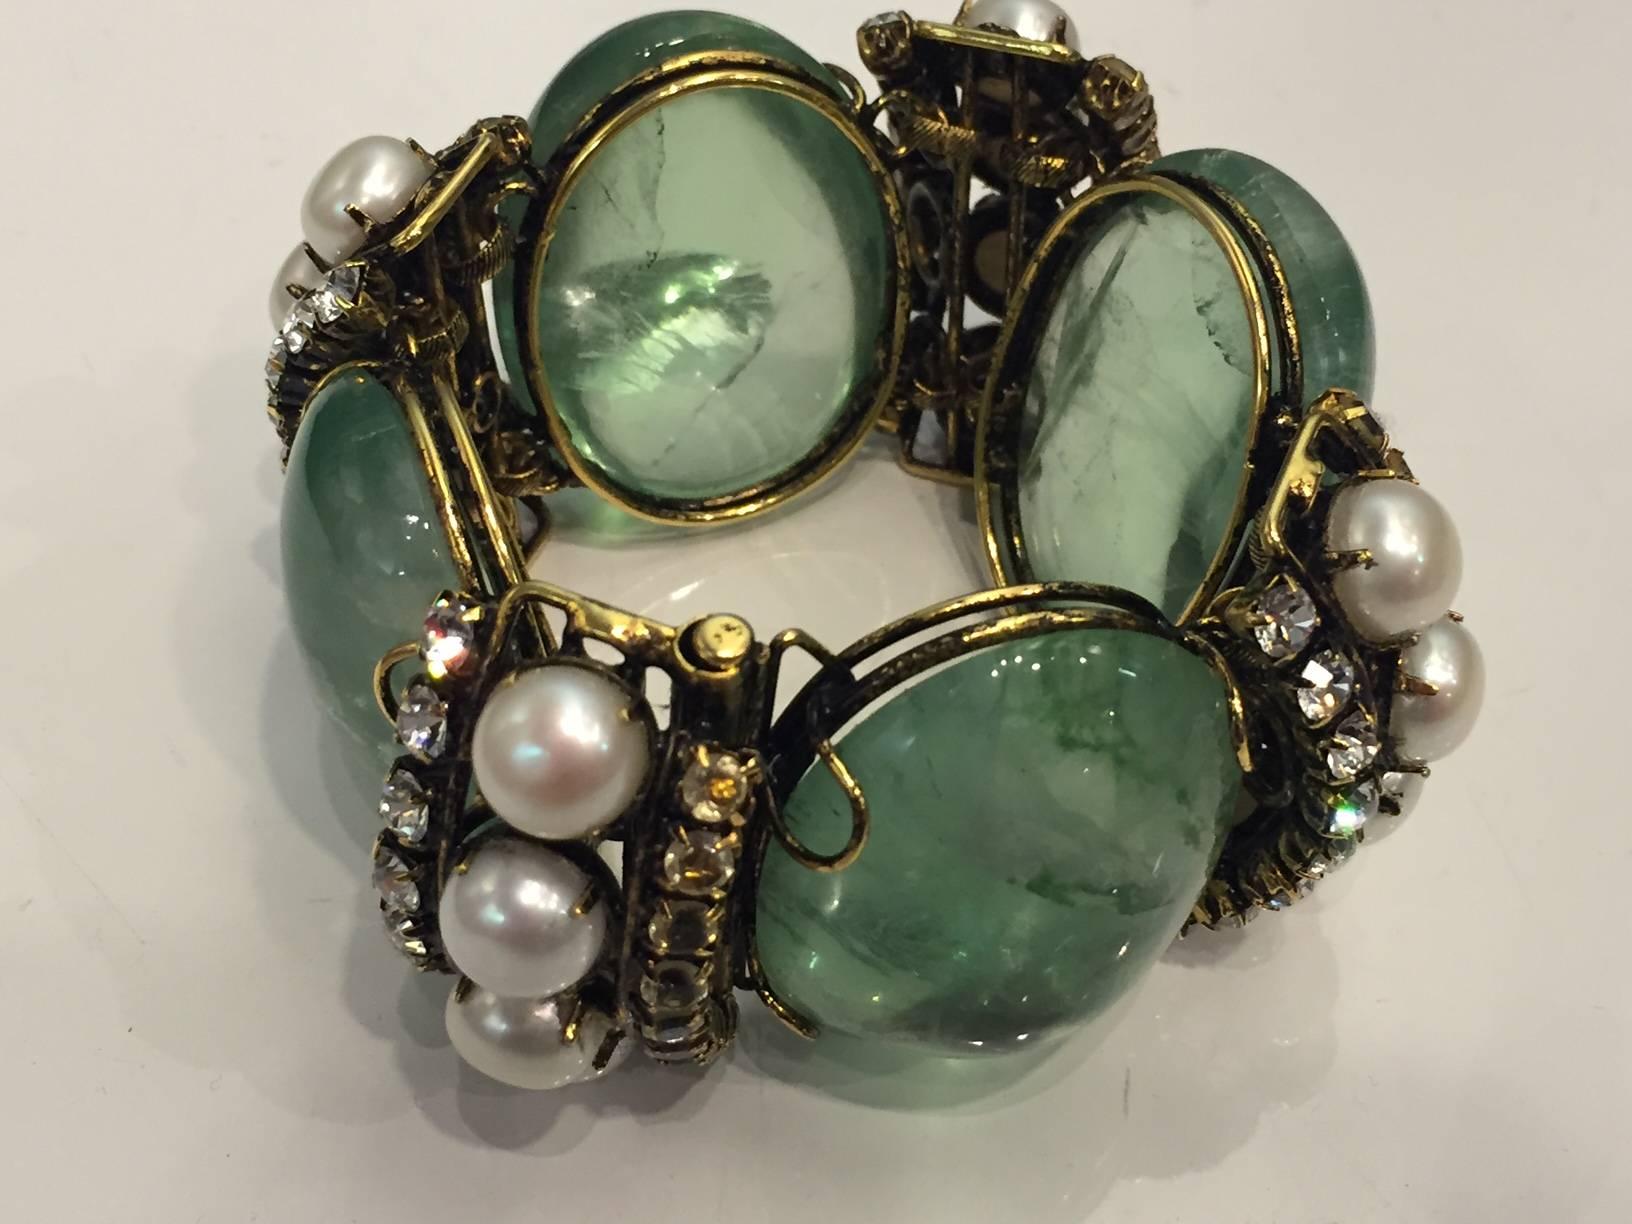 A gorgeous Iradj Moini massive cuff bracelet with large green cabochon quartz pieces hinged with pearl, topaz and clear stones set in gold-tone Indian-style antiqued setting.  Slide bar clasp.  2